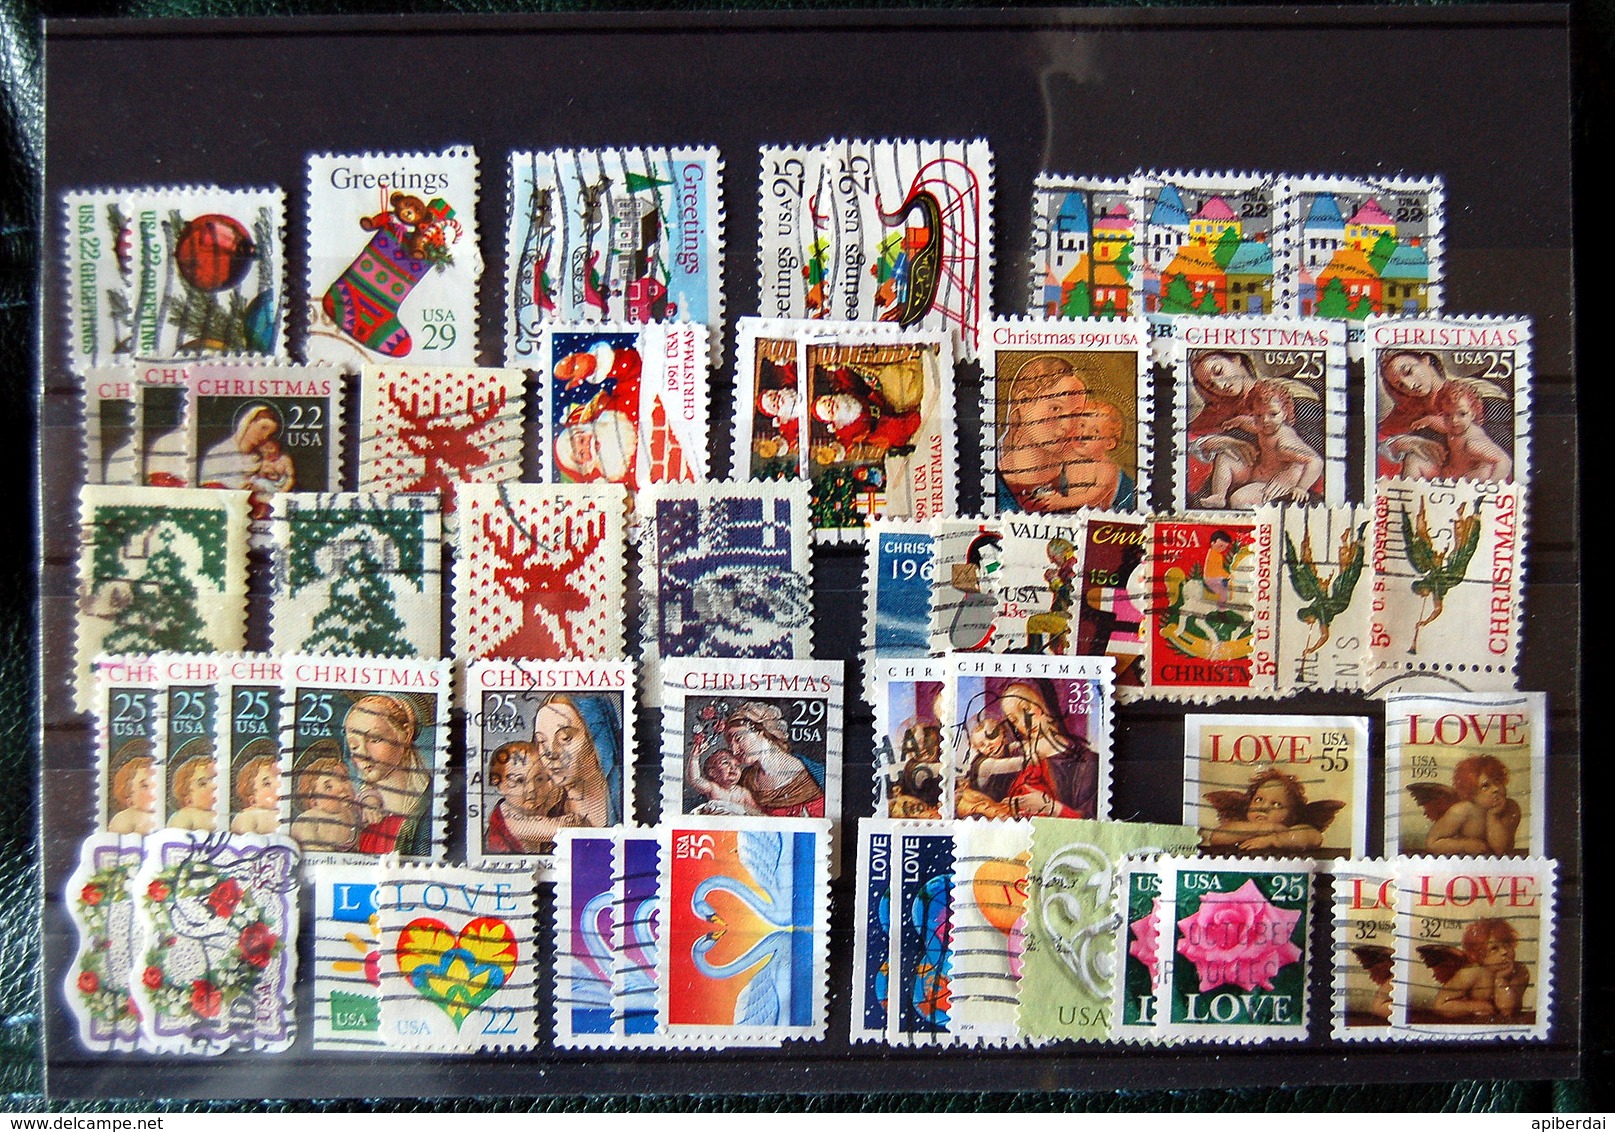 USA - Batch Of 56 Stamps With The Thema Of Christmas, Greetings And Love  (used) - Oblitérés